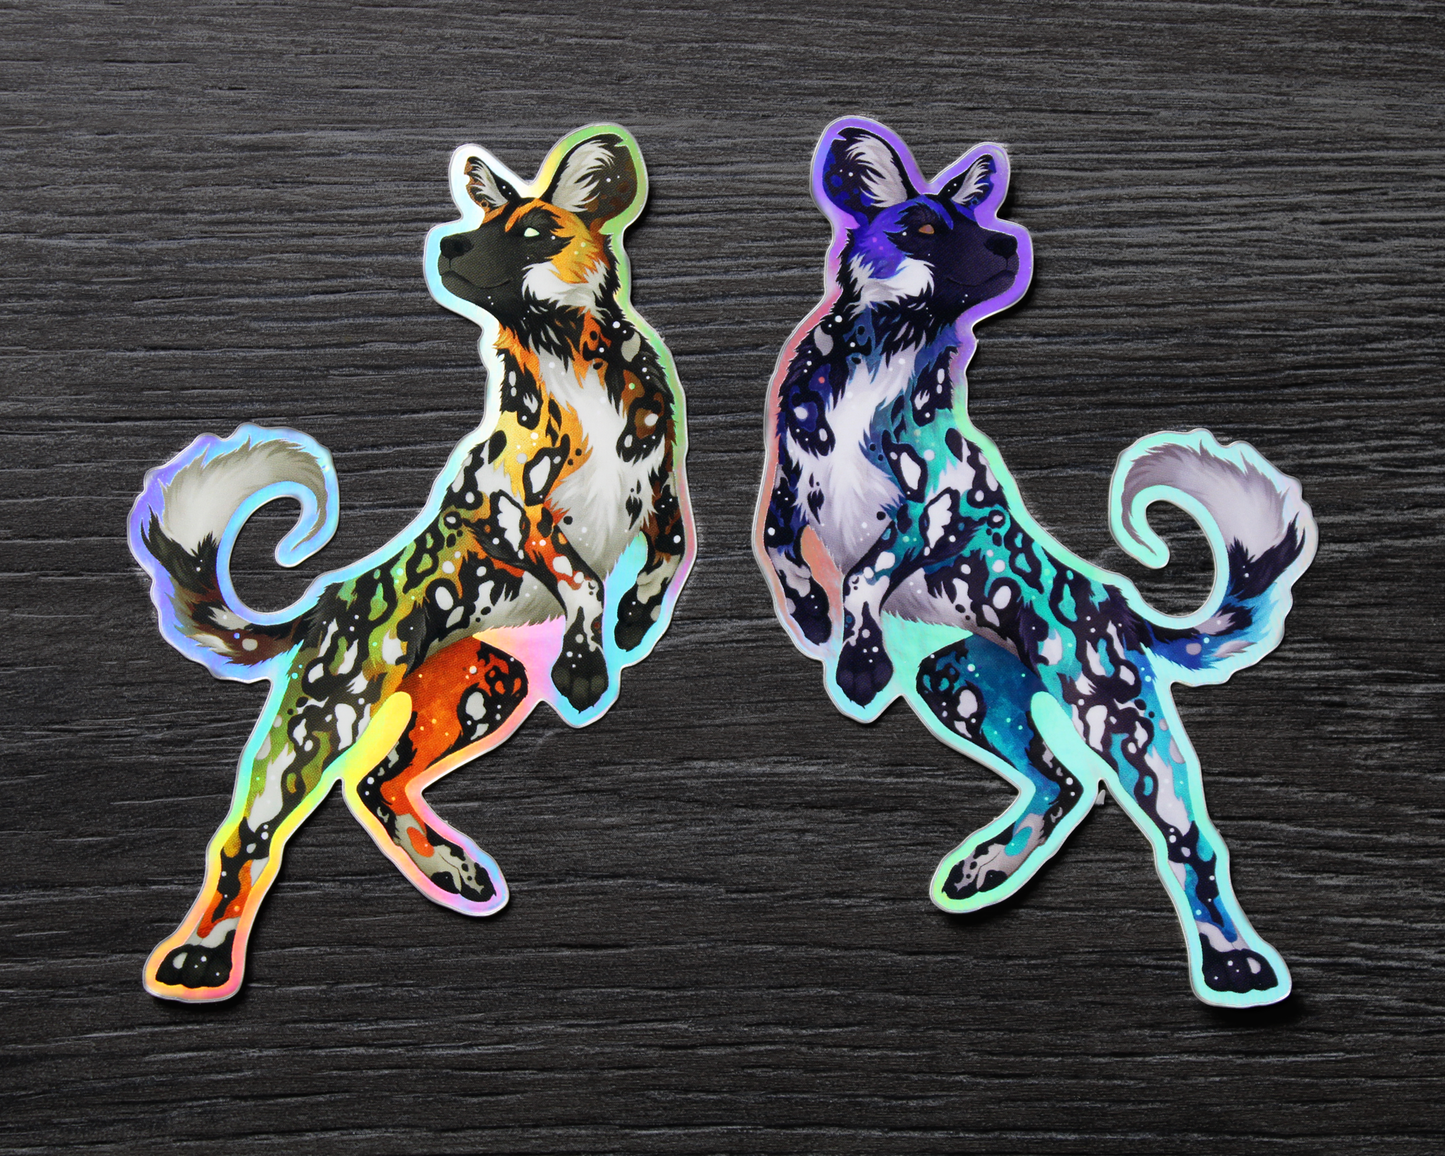 Cosmic Painted Dogs Vinyl Stickers